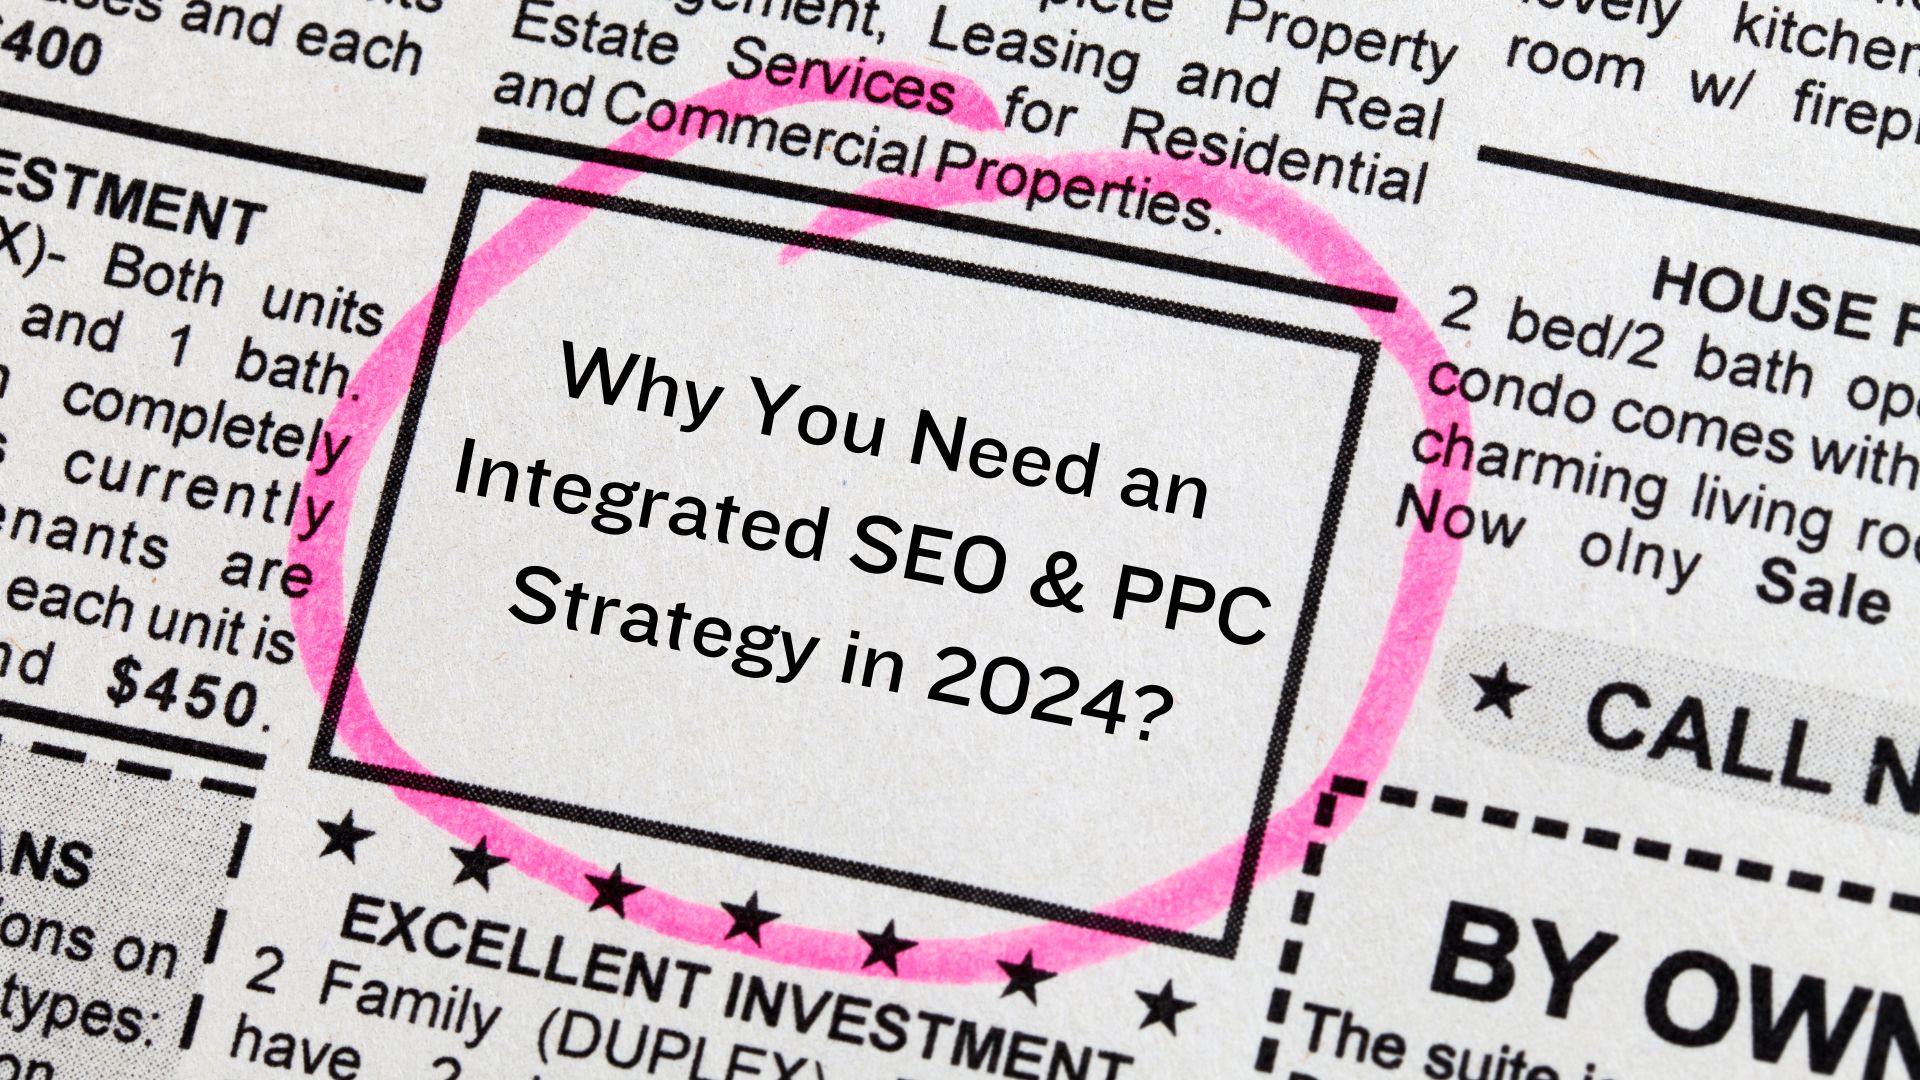 a newspaper with a red circle and black text saying Integrated SEO & PPC Strategy